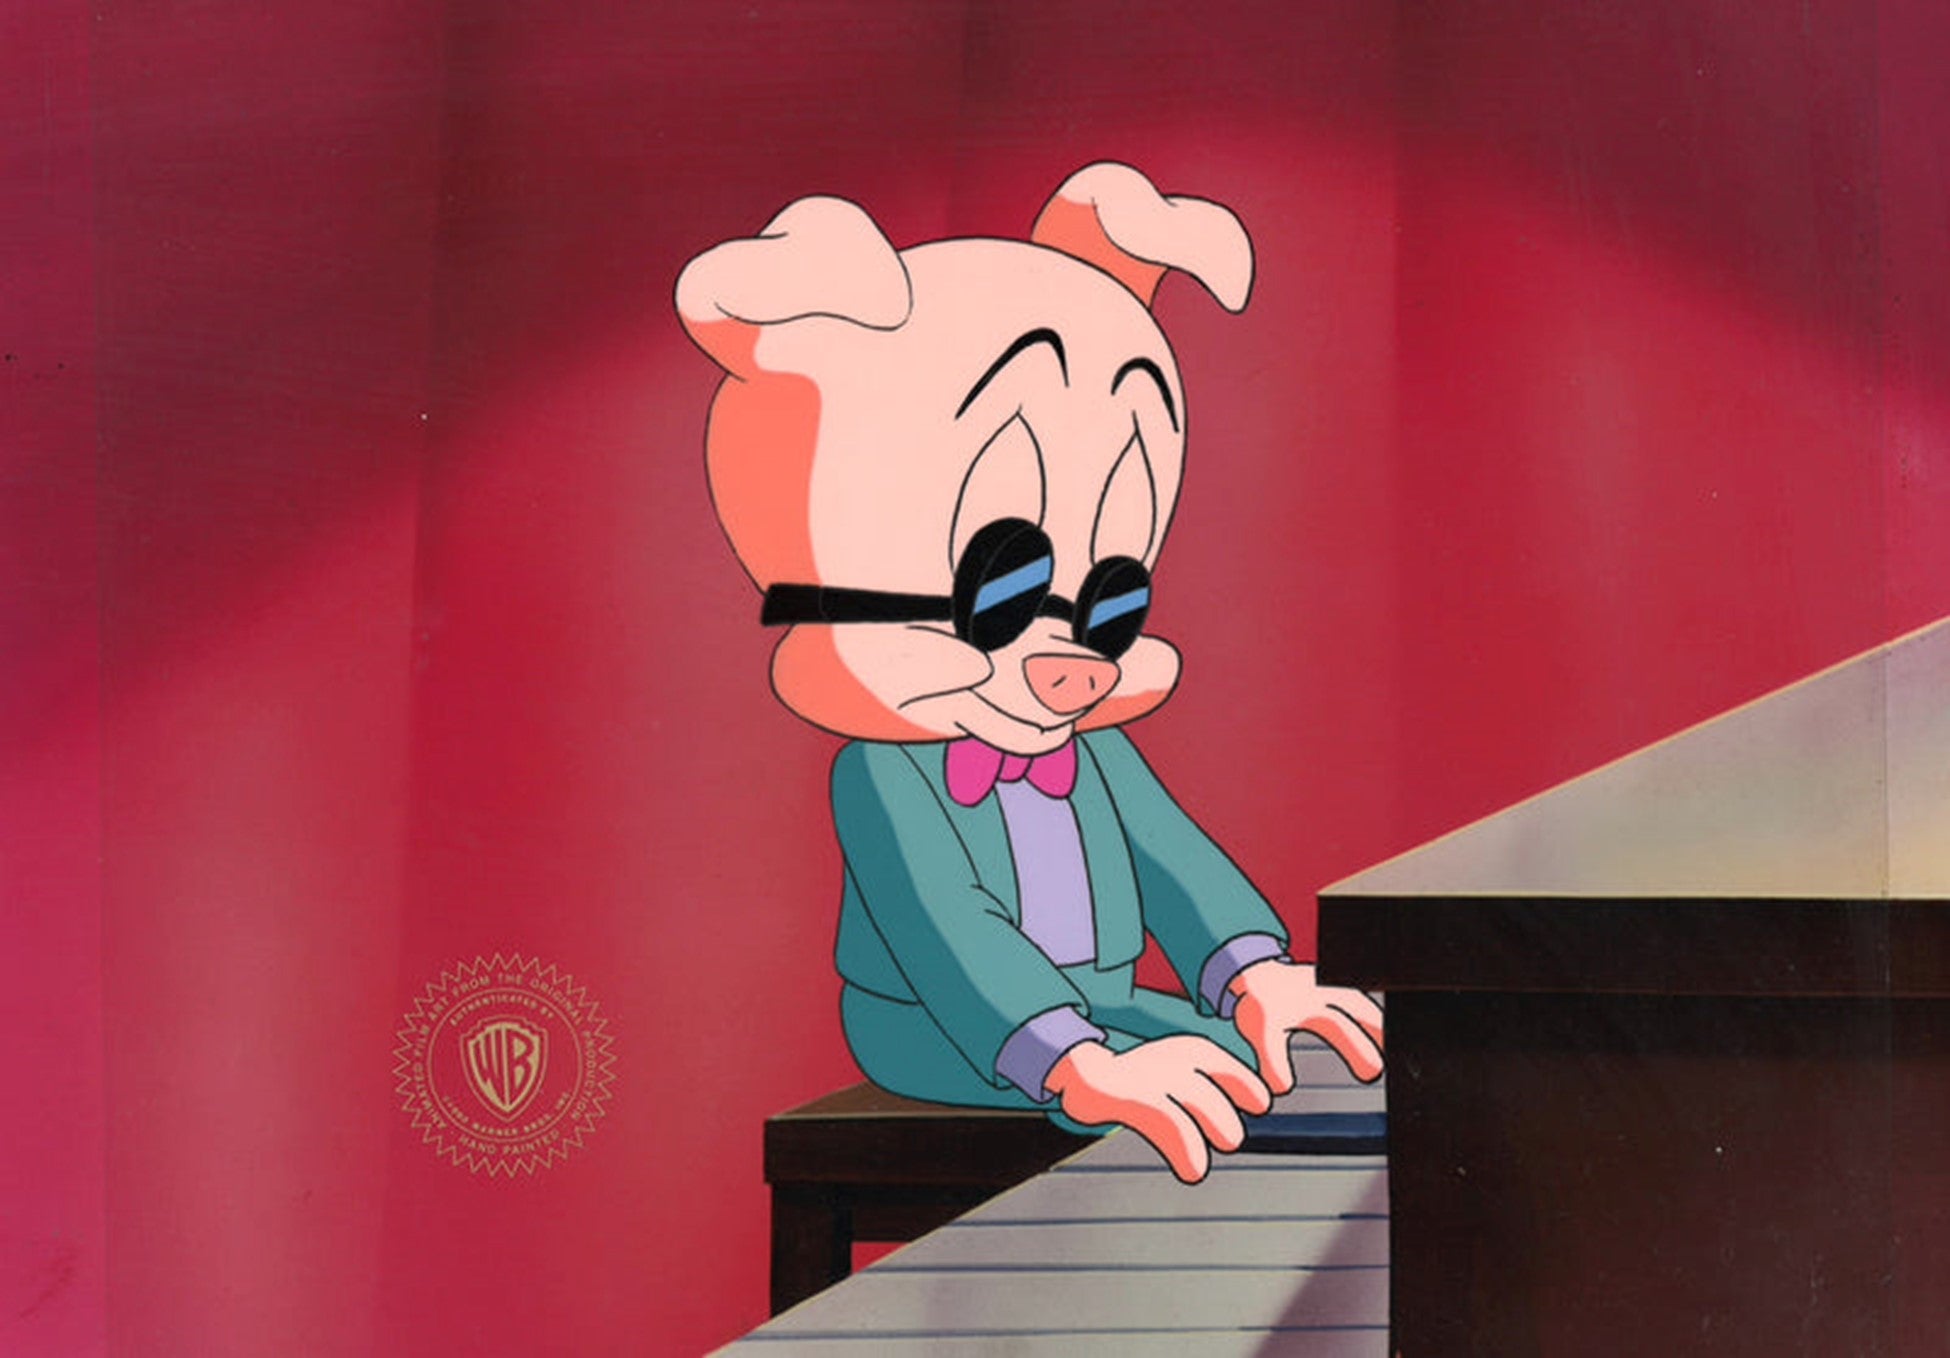 Hamton looks cool wearing his dark sunglasses, as he plays the piano. 